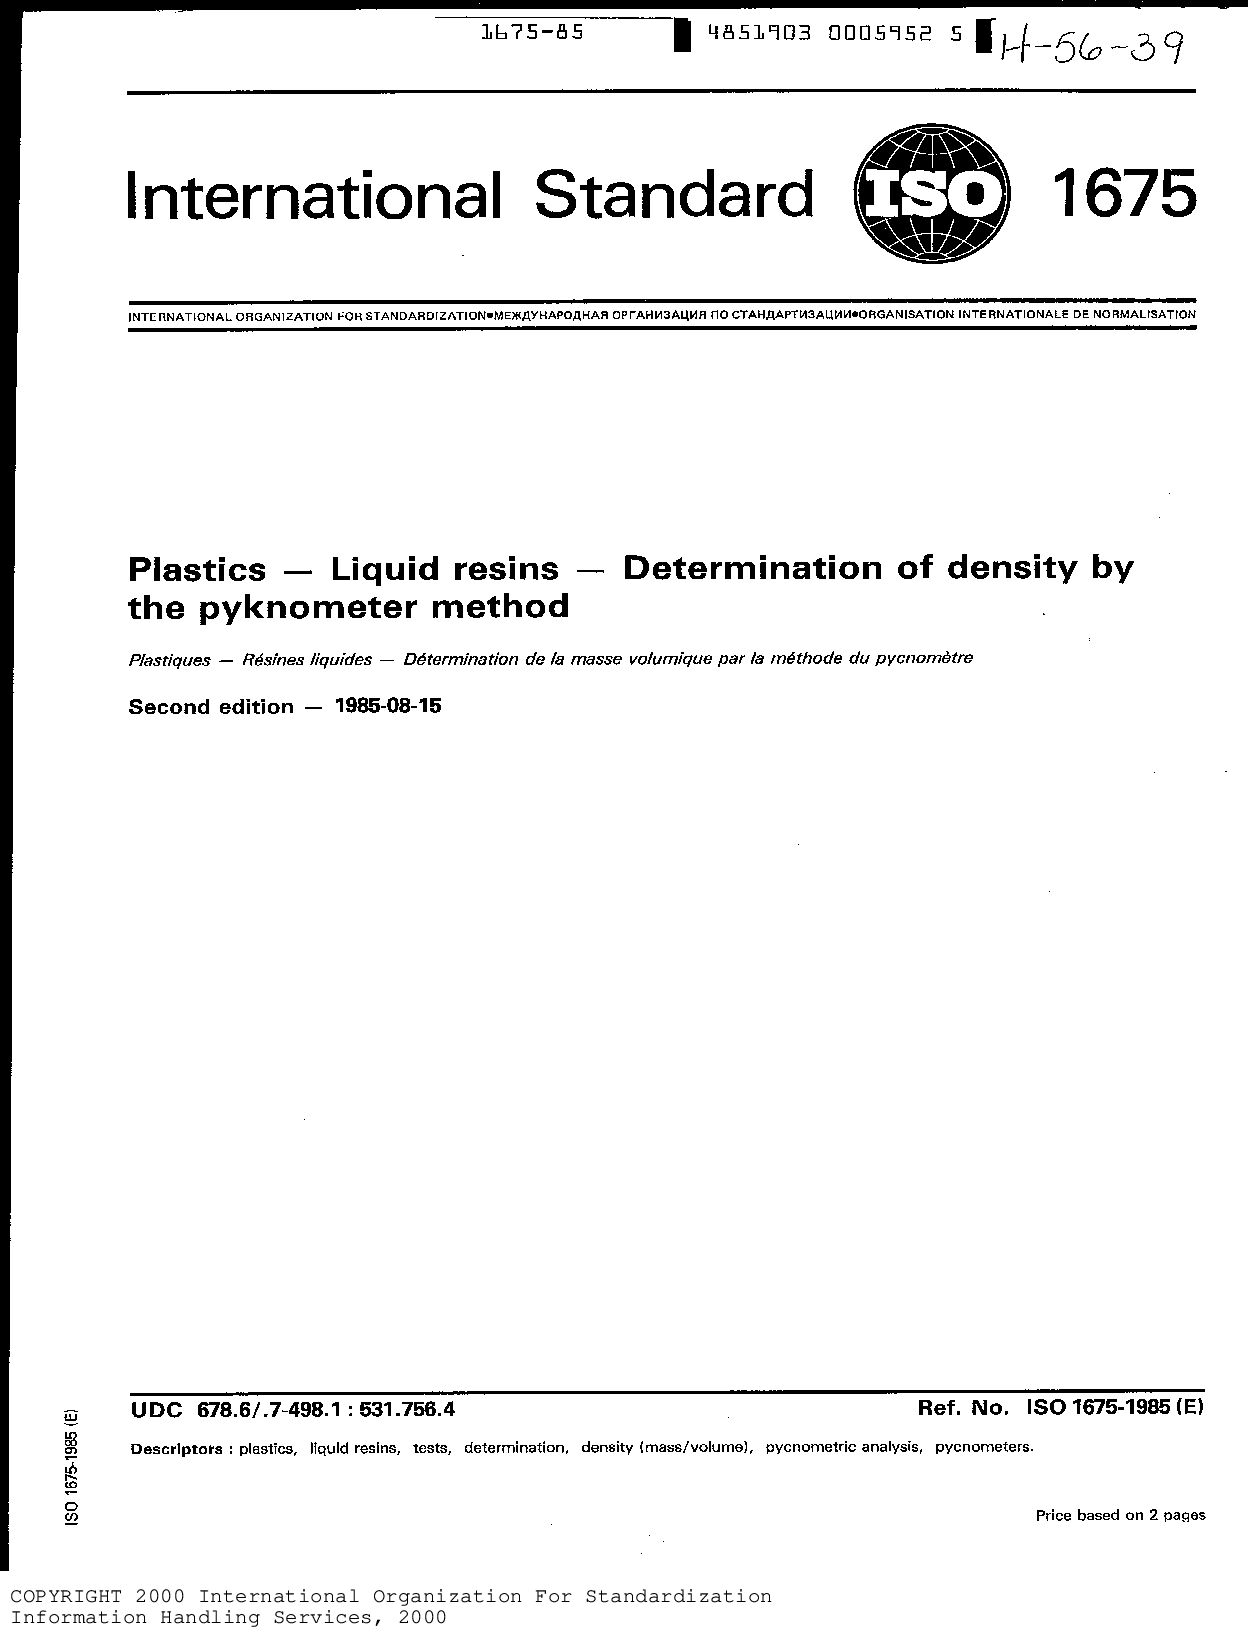 ISO 1675:1985